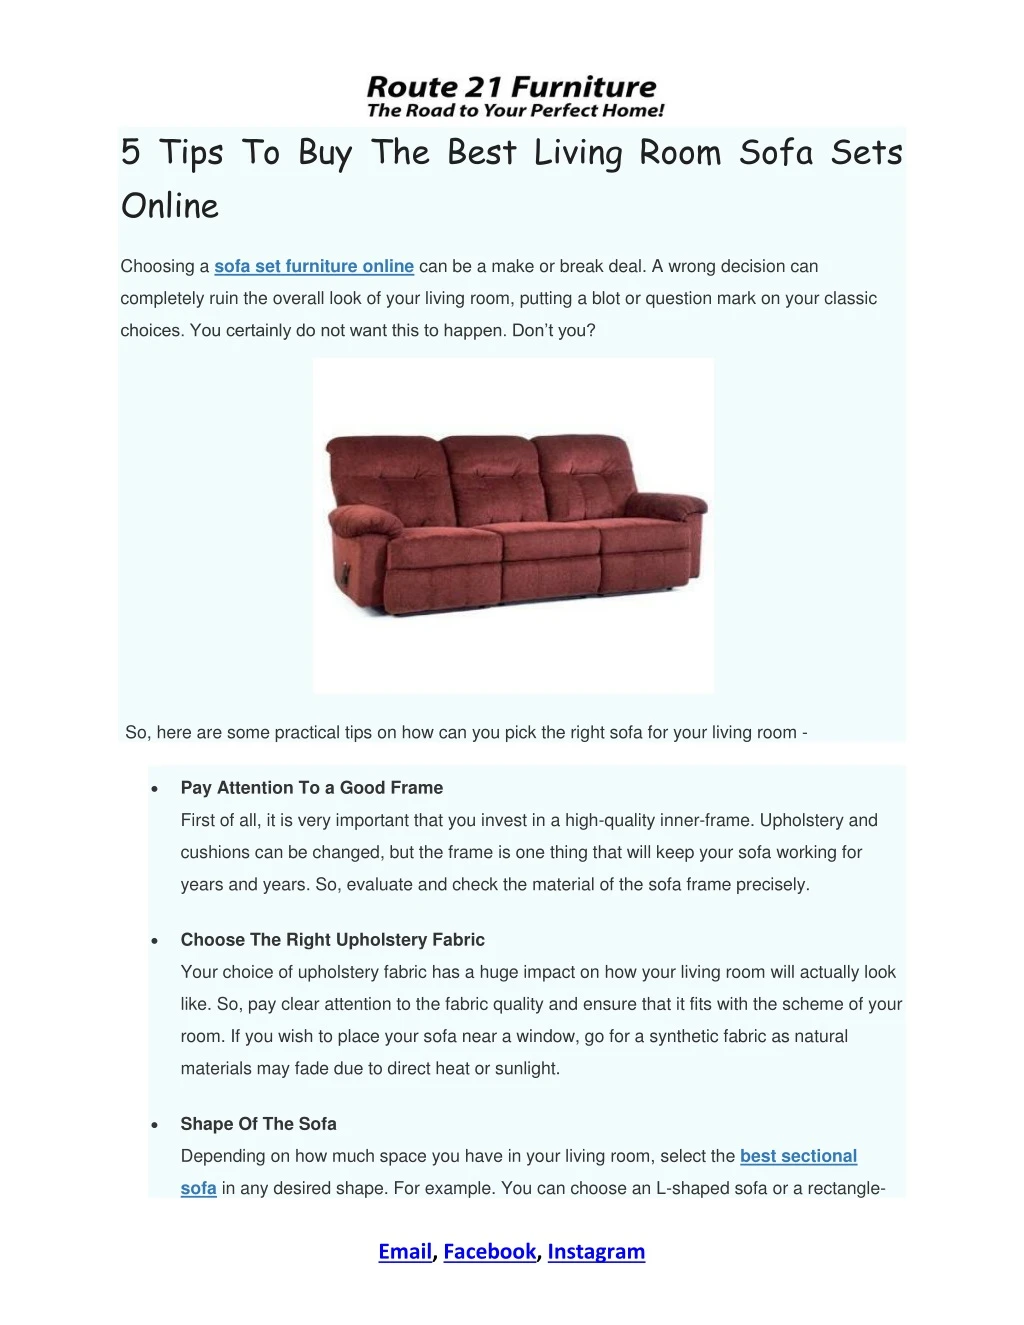 5 tips to buy the best living room sofa sets